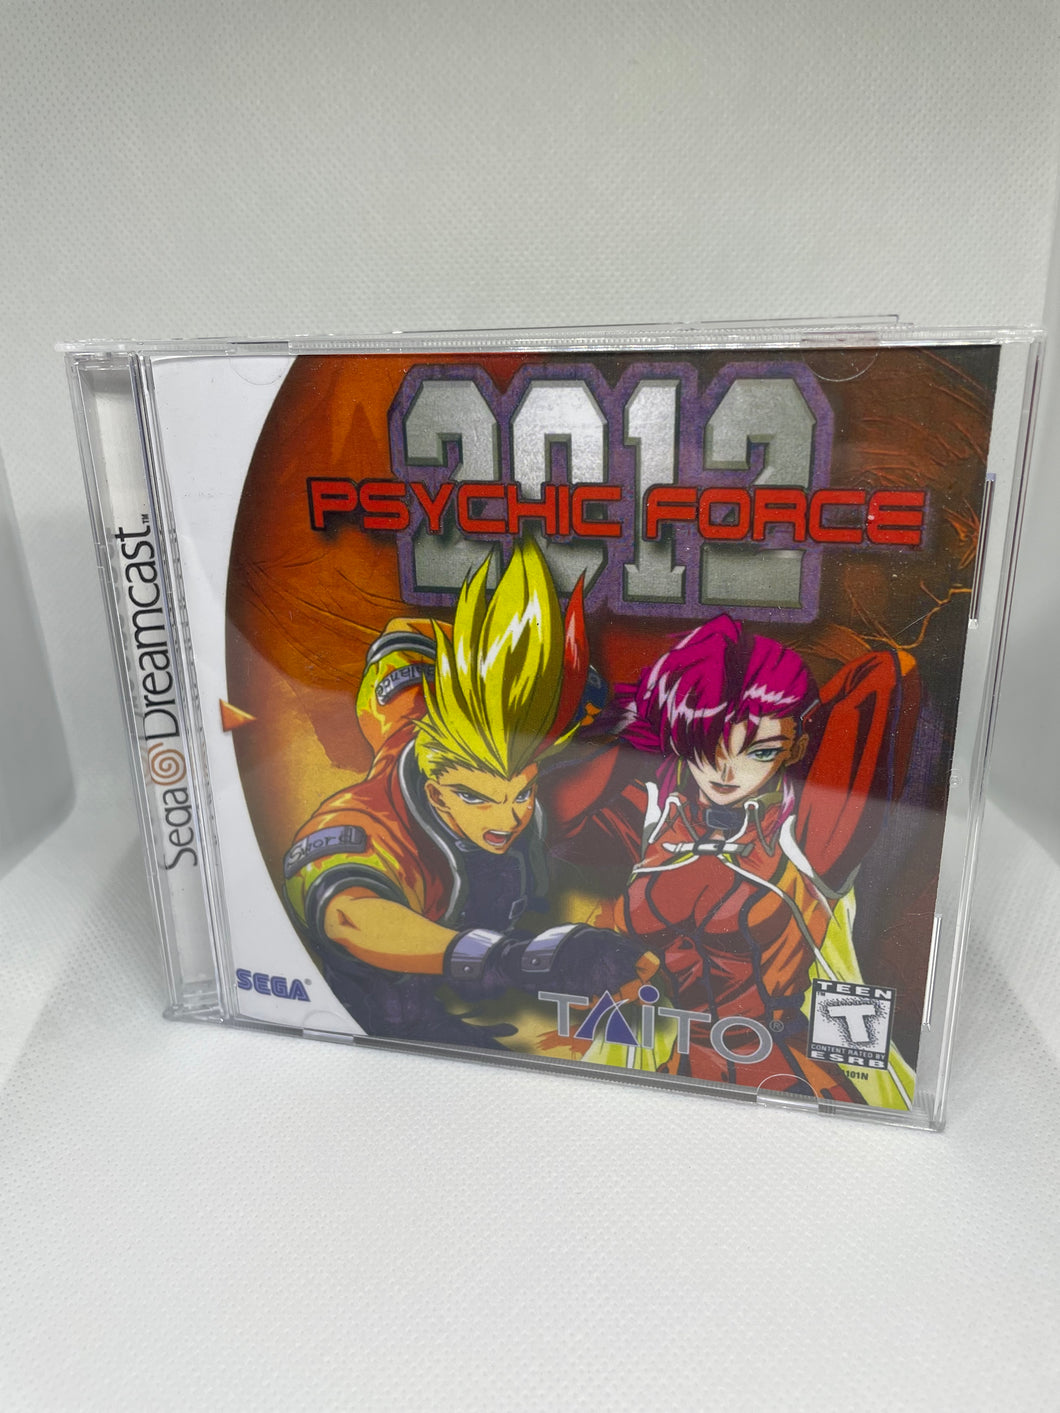 Psychic Force 2012 Dreamcast Reproduction Case